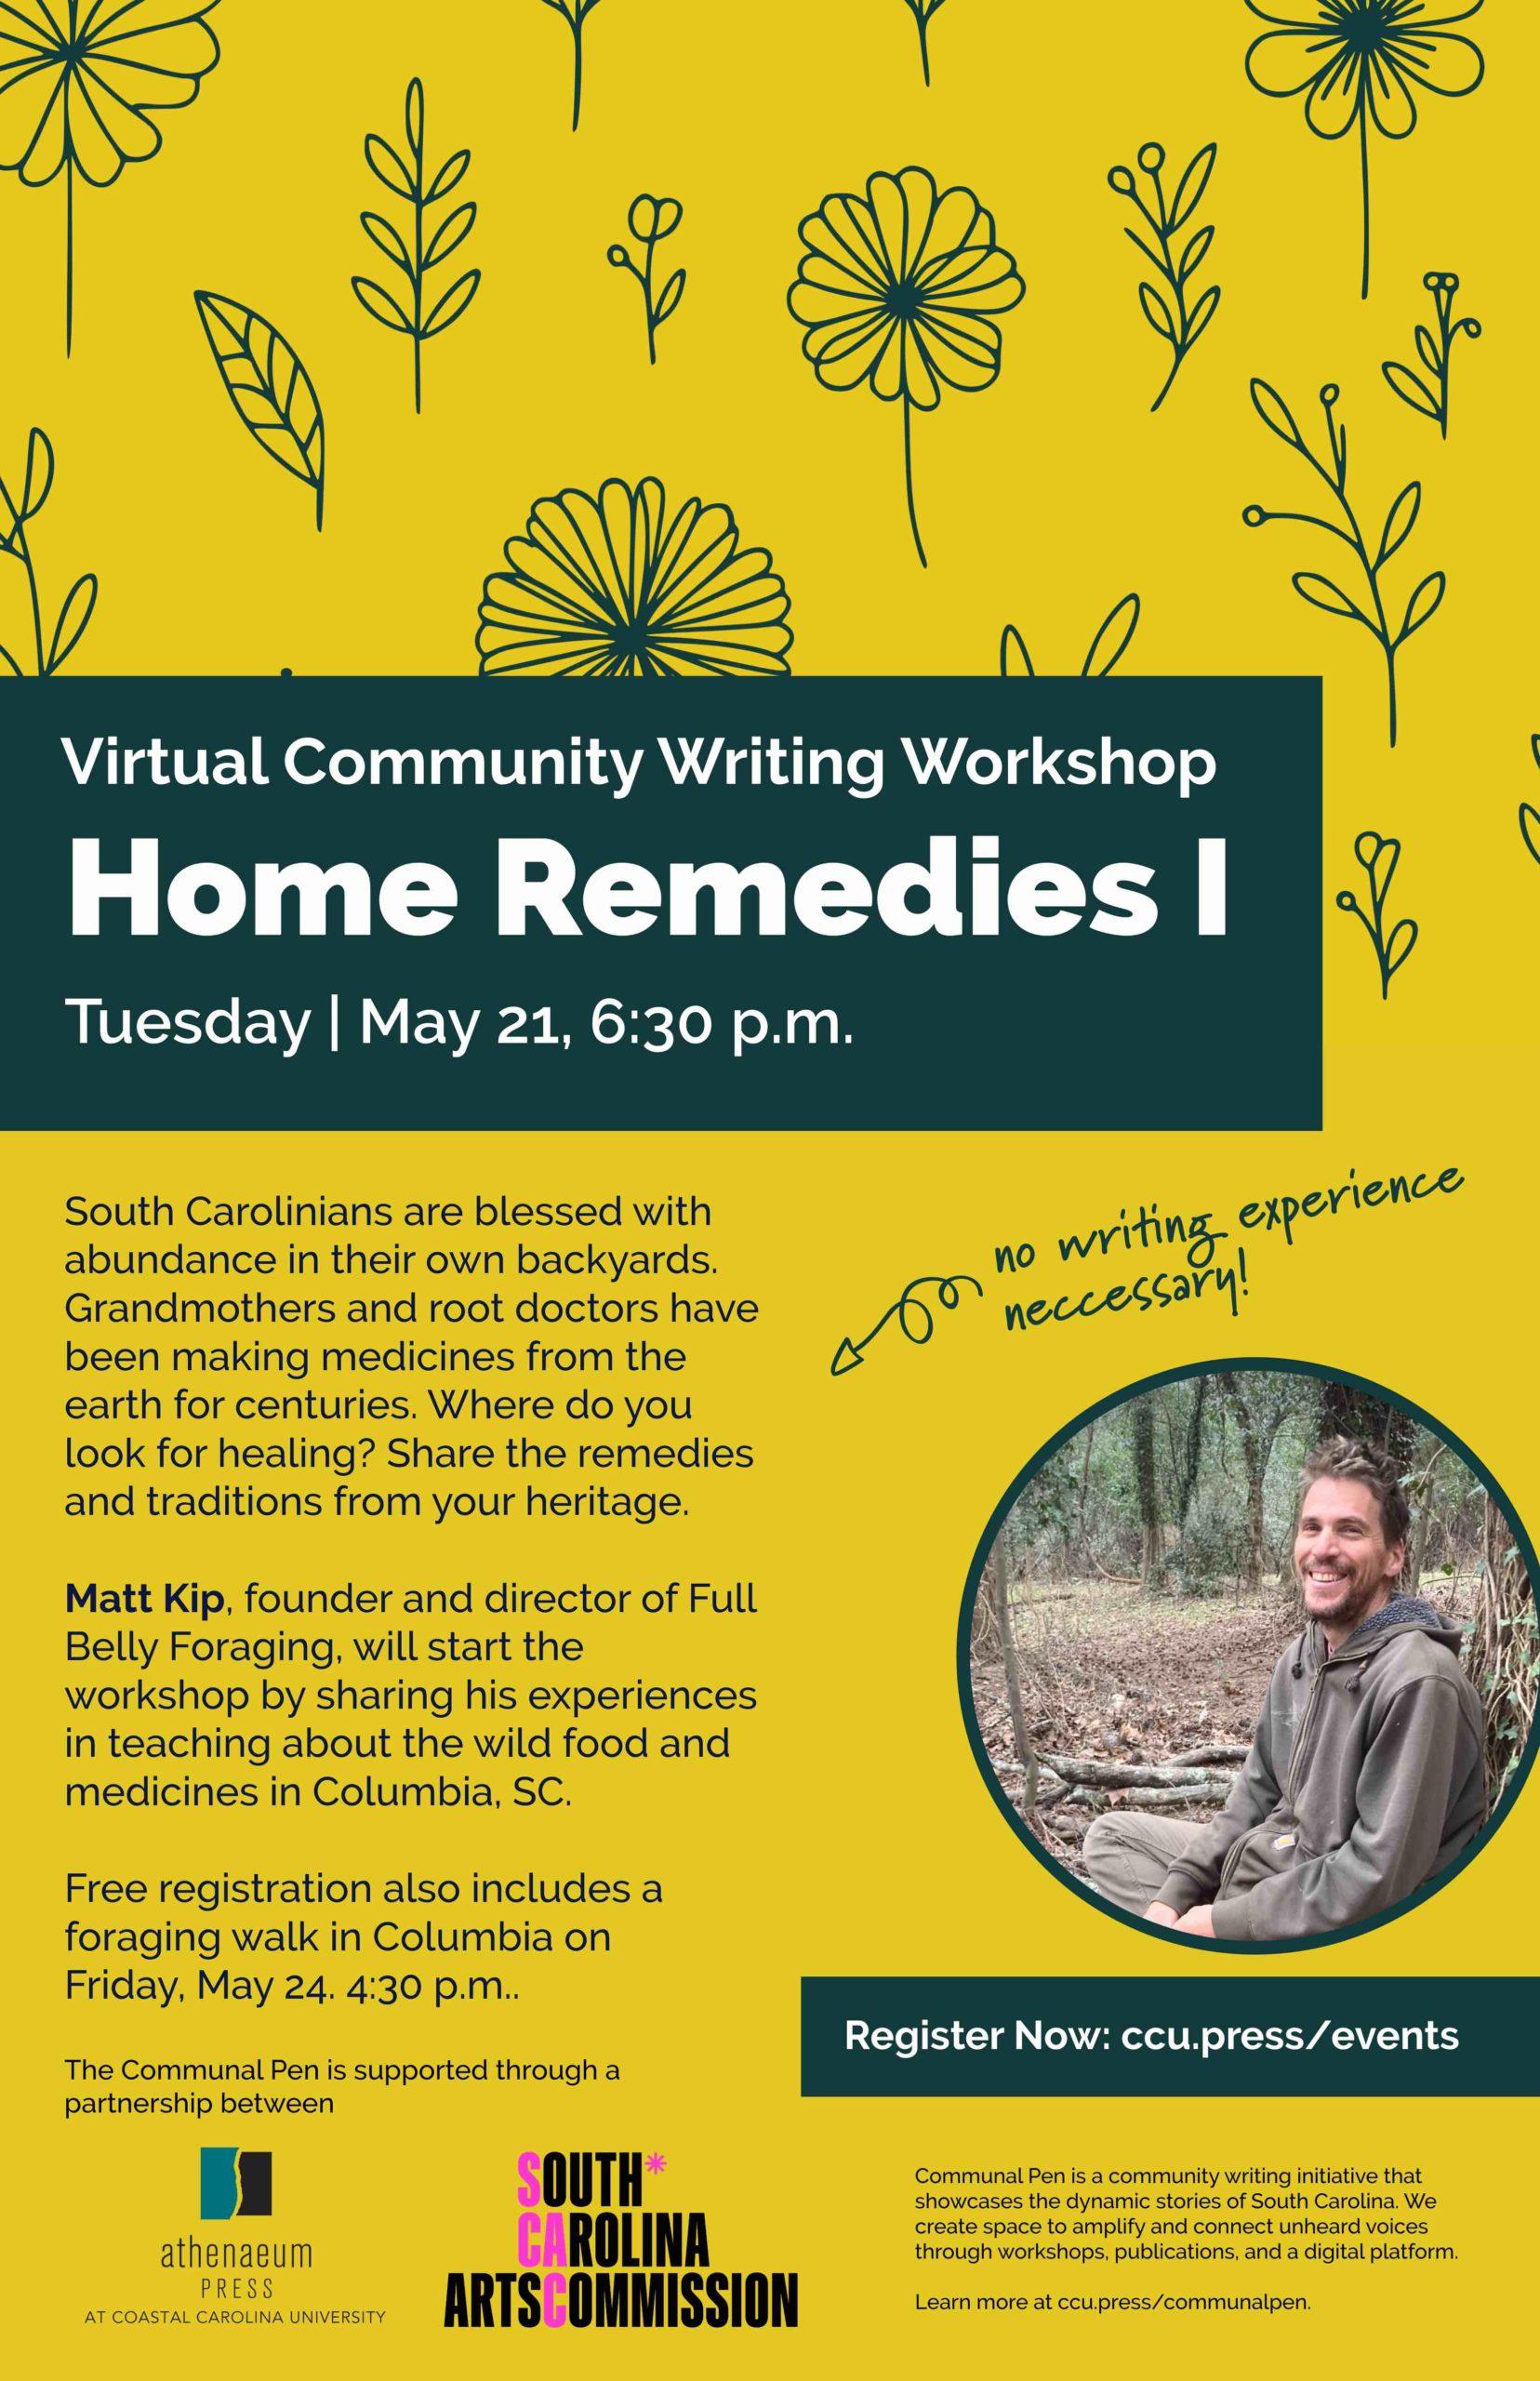 South Carolinians are blessed with abundance in their own backyards, Grandmothers and root doctors have been making medicines from the earth for centuries. Where do you look for healing? Share the remedies and traditions from your heritage.  Matt Kip, founder and director of Full Belly Foraging, will start the workshop by sharing his experiences in teaching about the wild food and medicines in Columbia, SC.   Free registration also includes a foraging walk in Columbia on May 4.